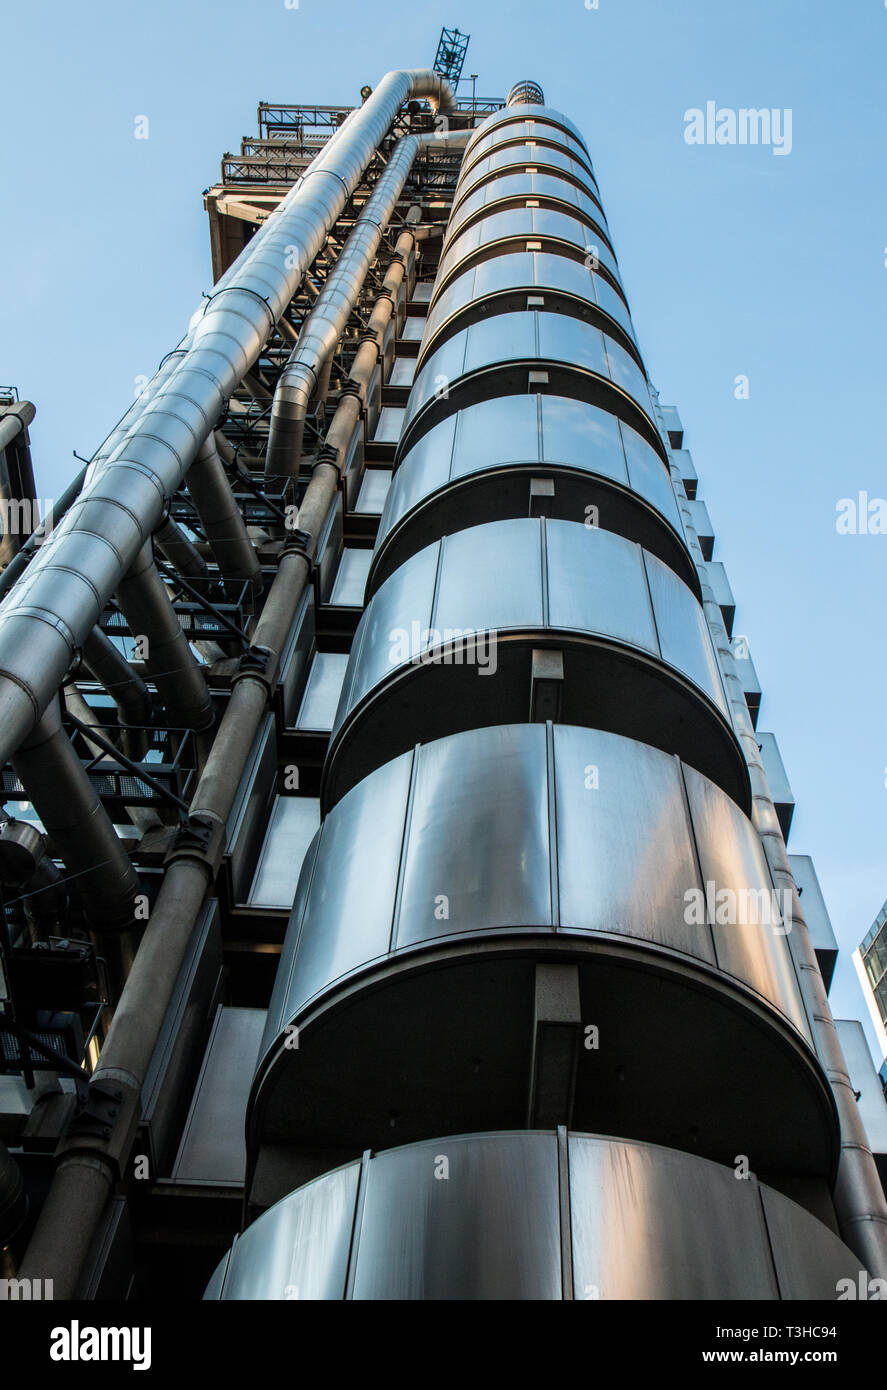 Lloyd's building London - Finical district Stock Photo